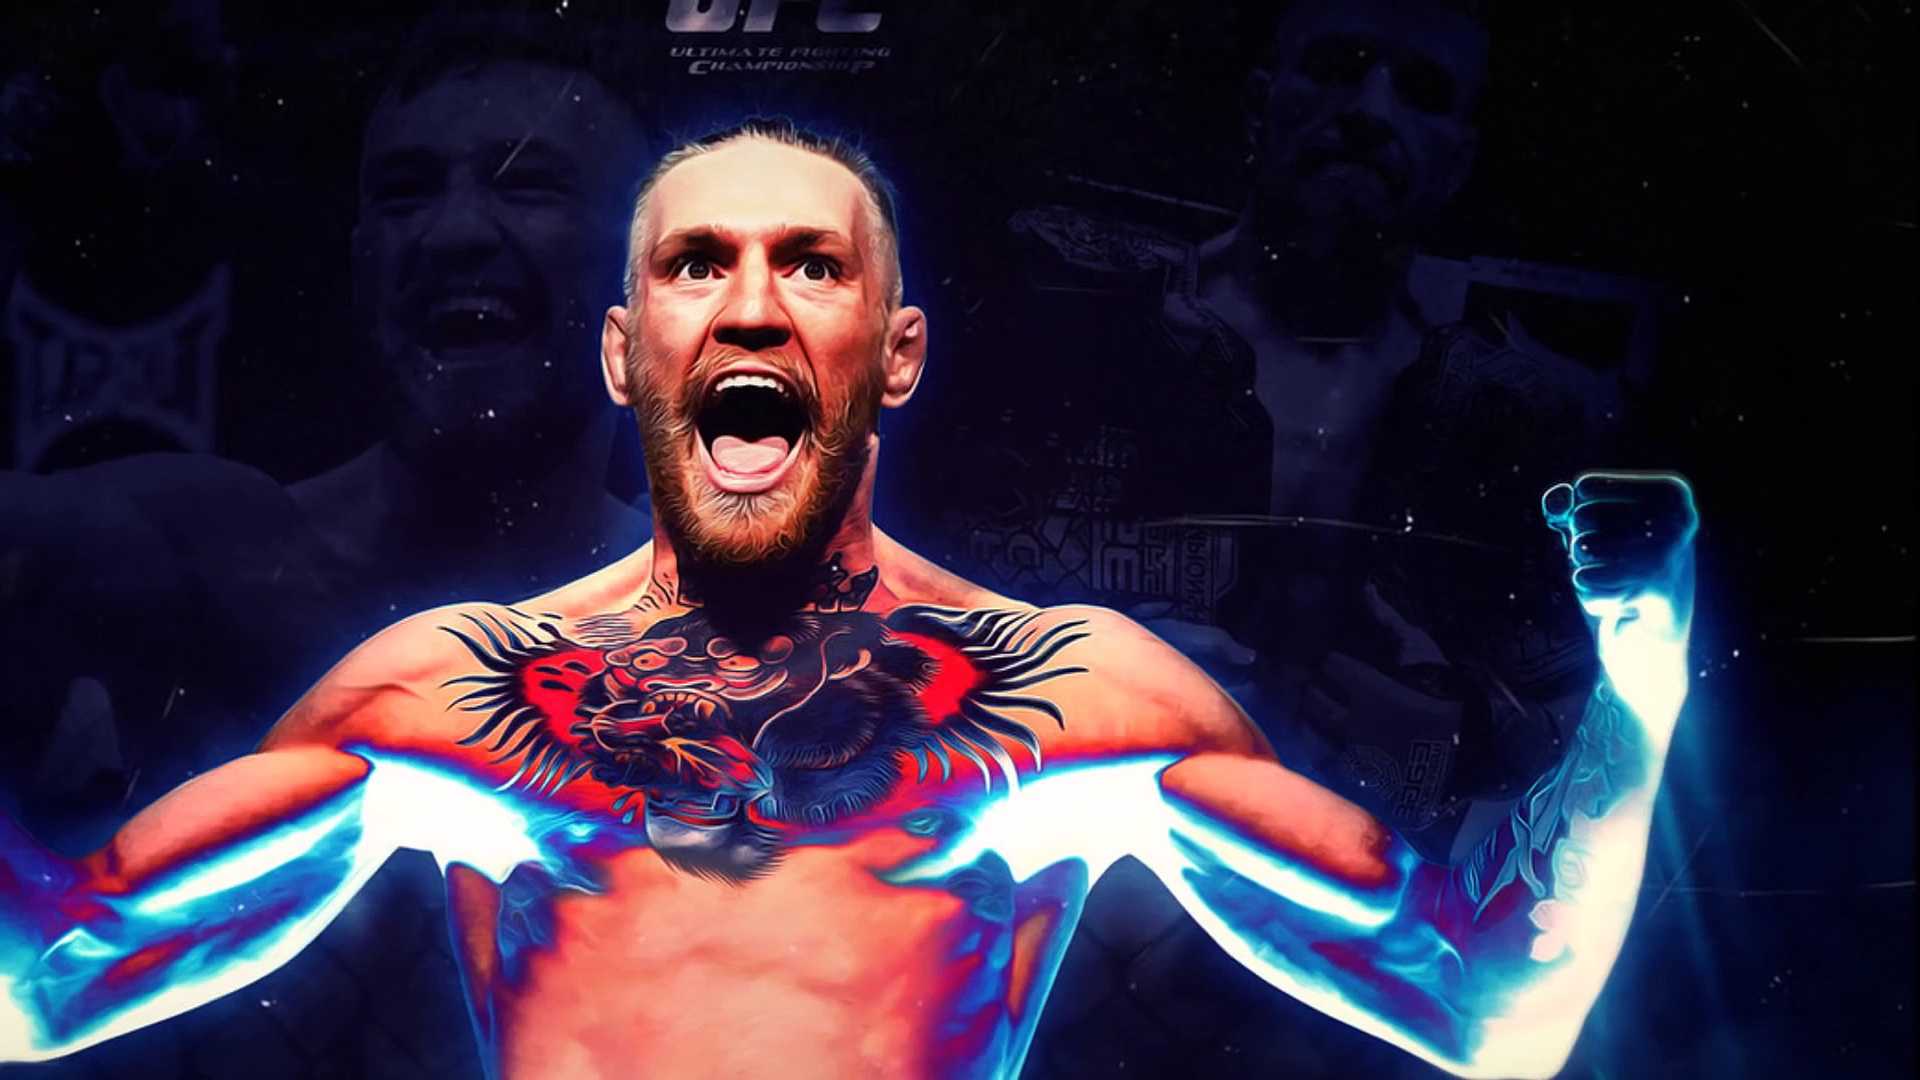 Conor Mcgregor HD In High Quality And Full Wallpaper For Mobile